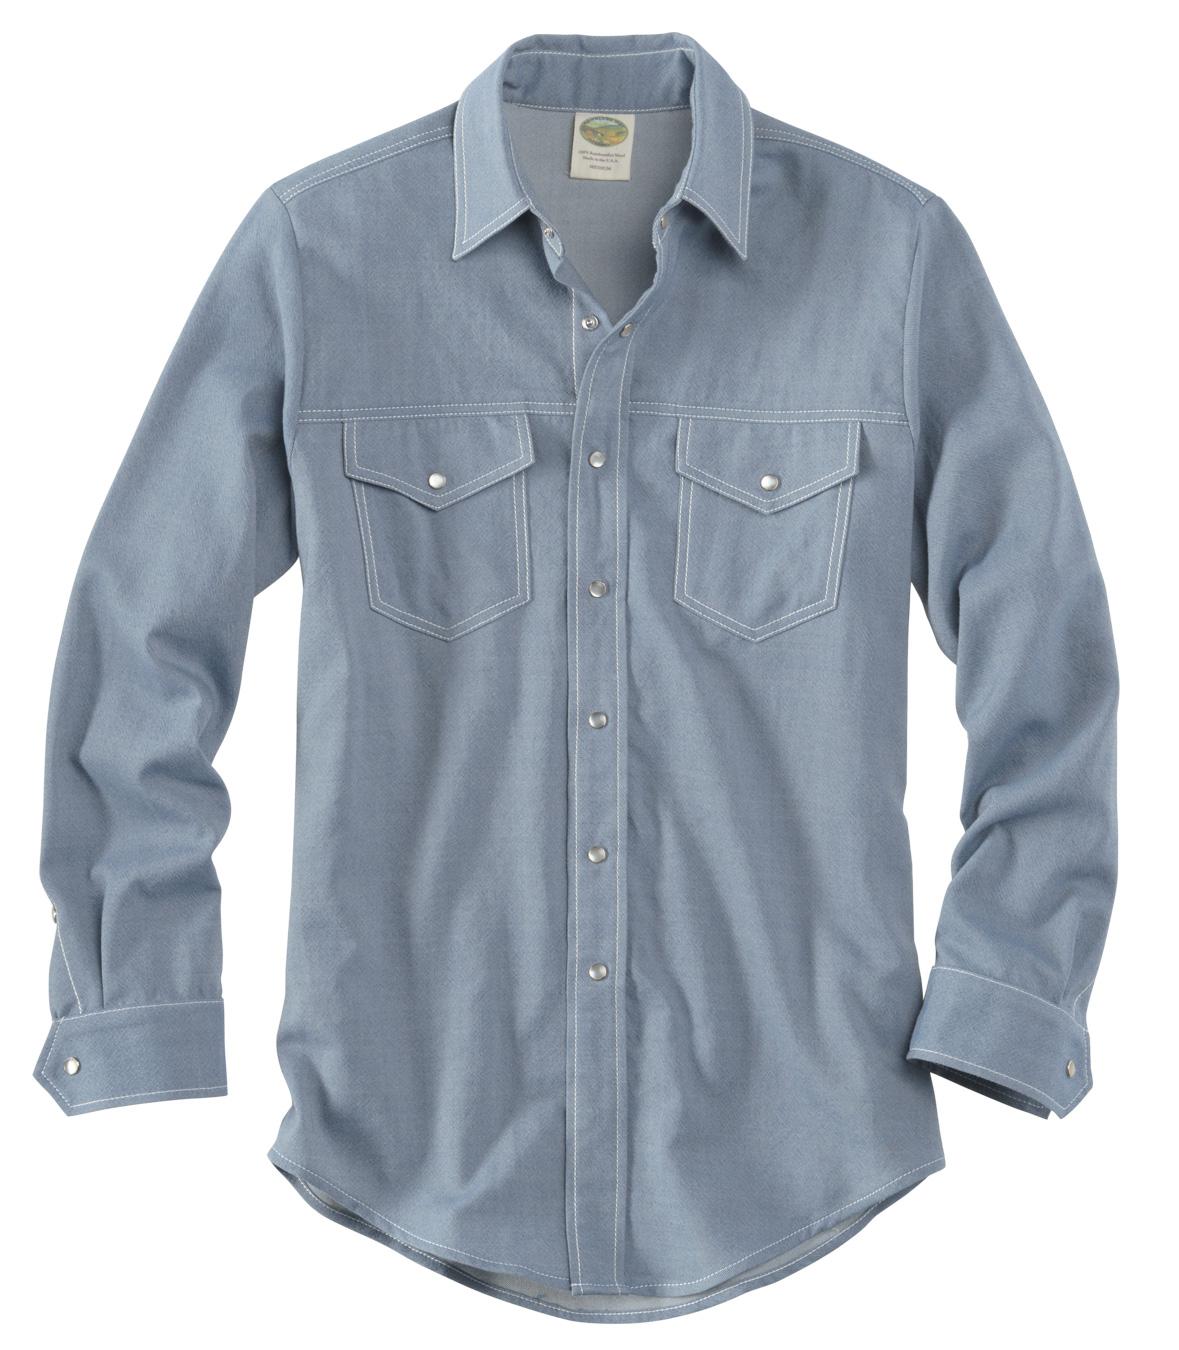 Western shirt with two pockets for a casual look